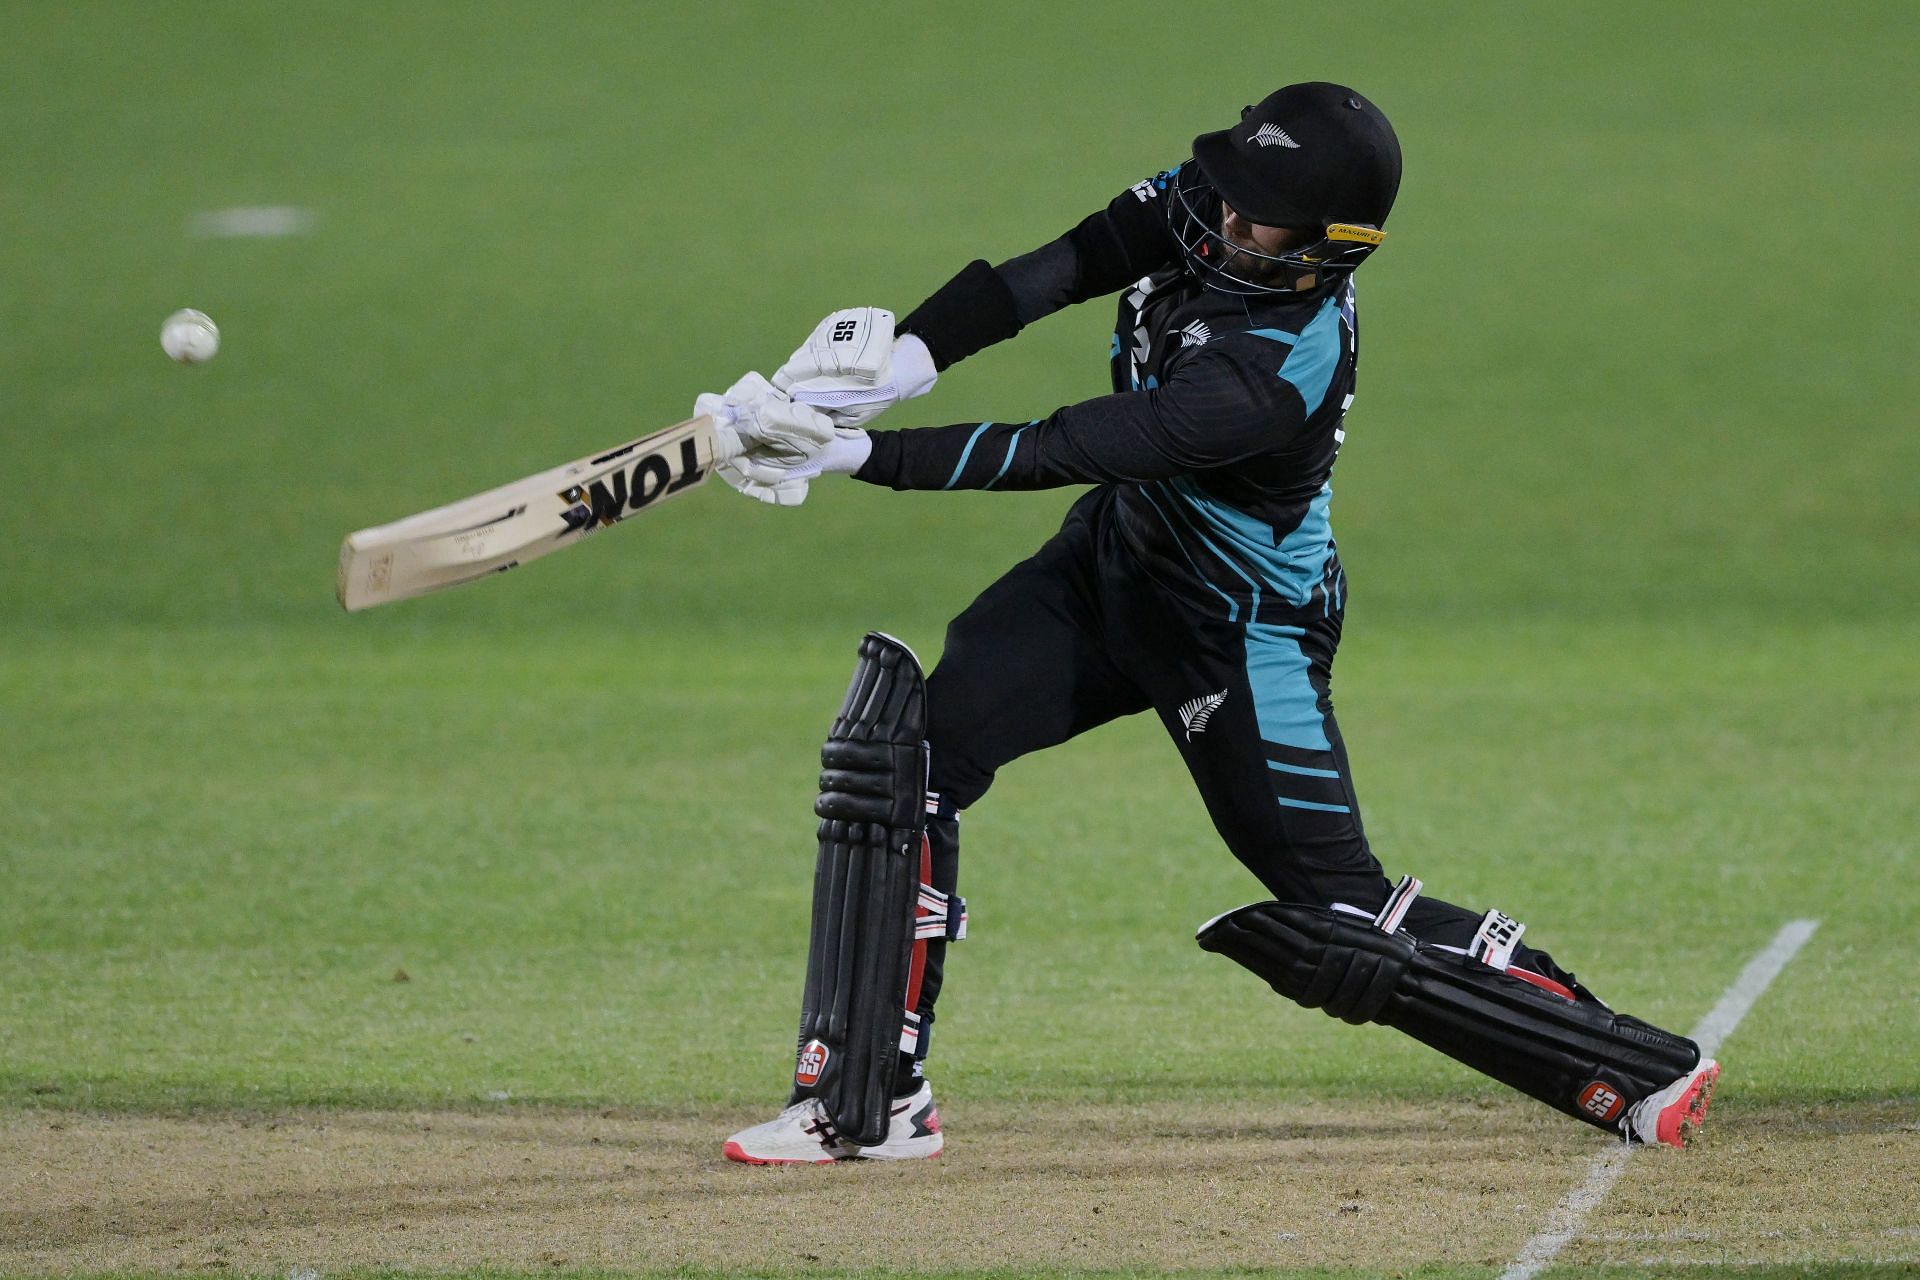 Devon Conway top-scored for New Zealand with 59. (Credits: Getty)